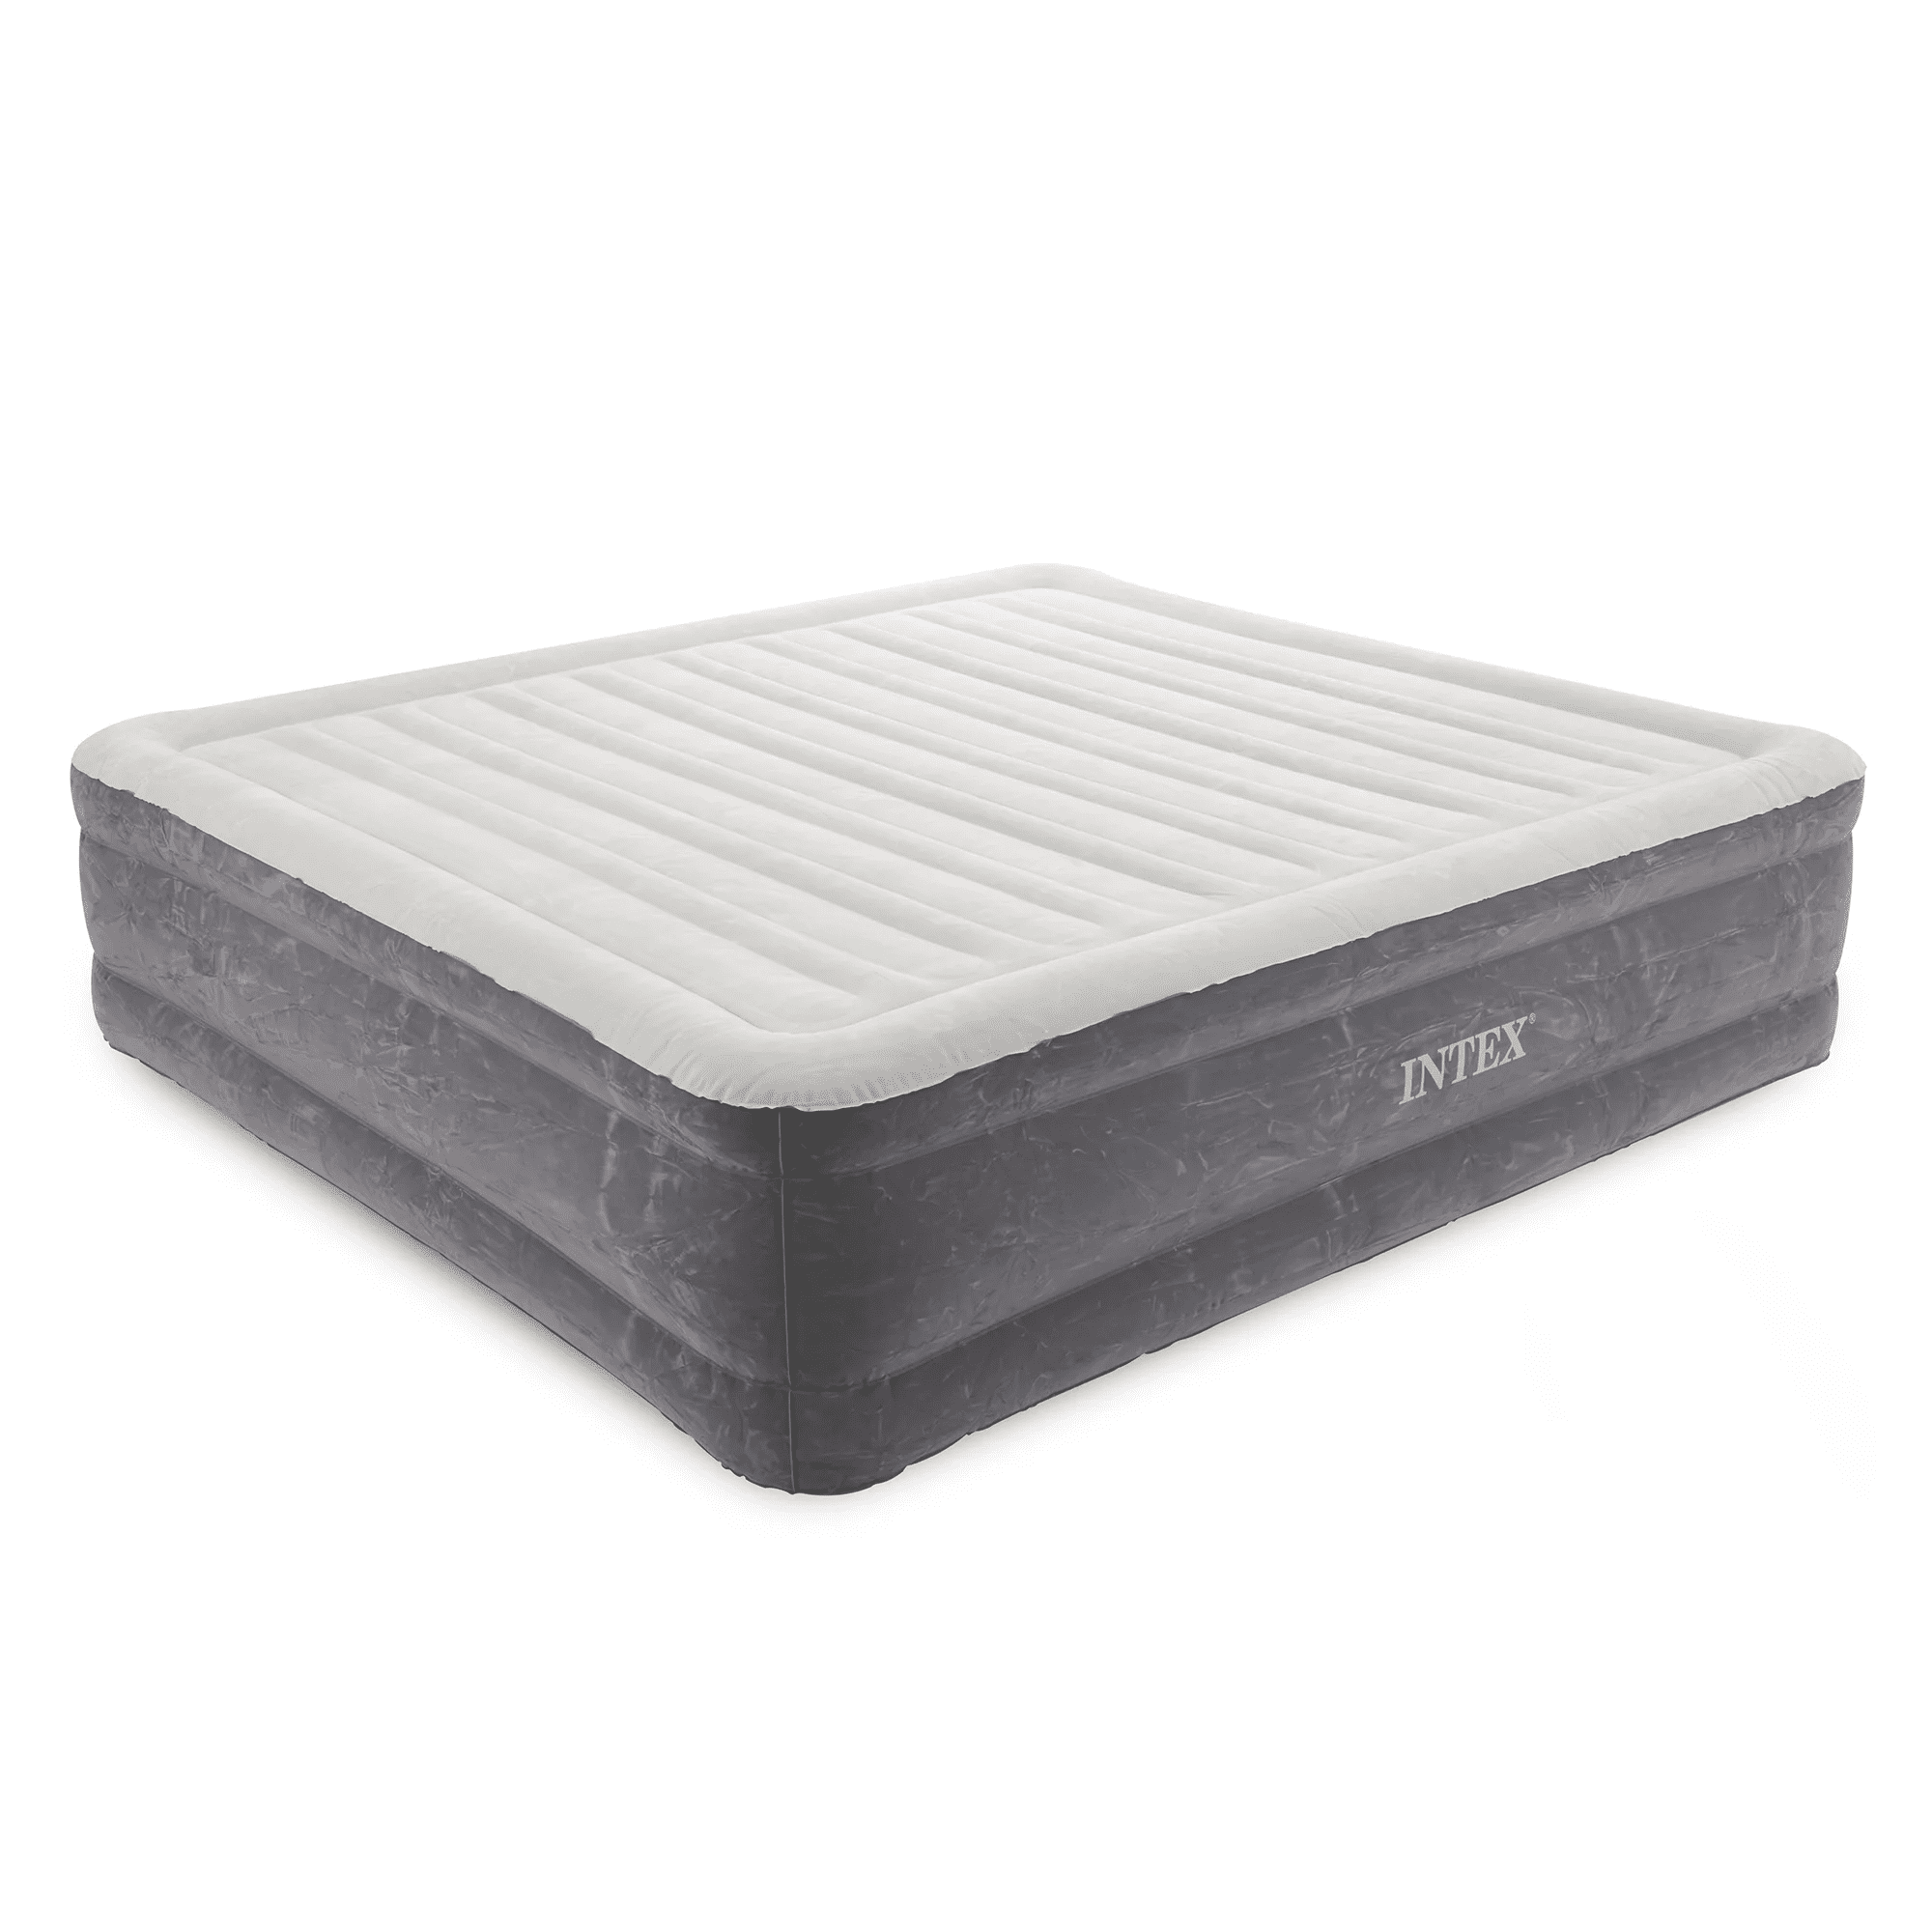 Intex 64409ST 18-inch Inflatable Elevated Premium Comfort Airbed w/Built-In Pump, King